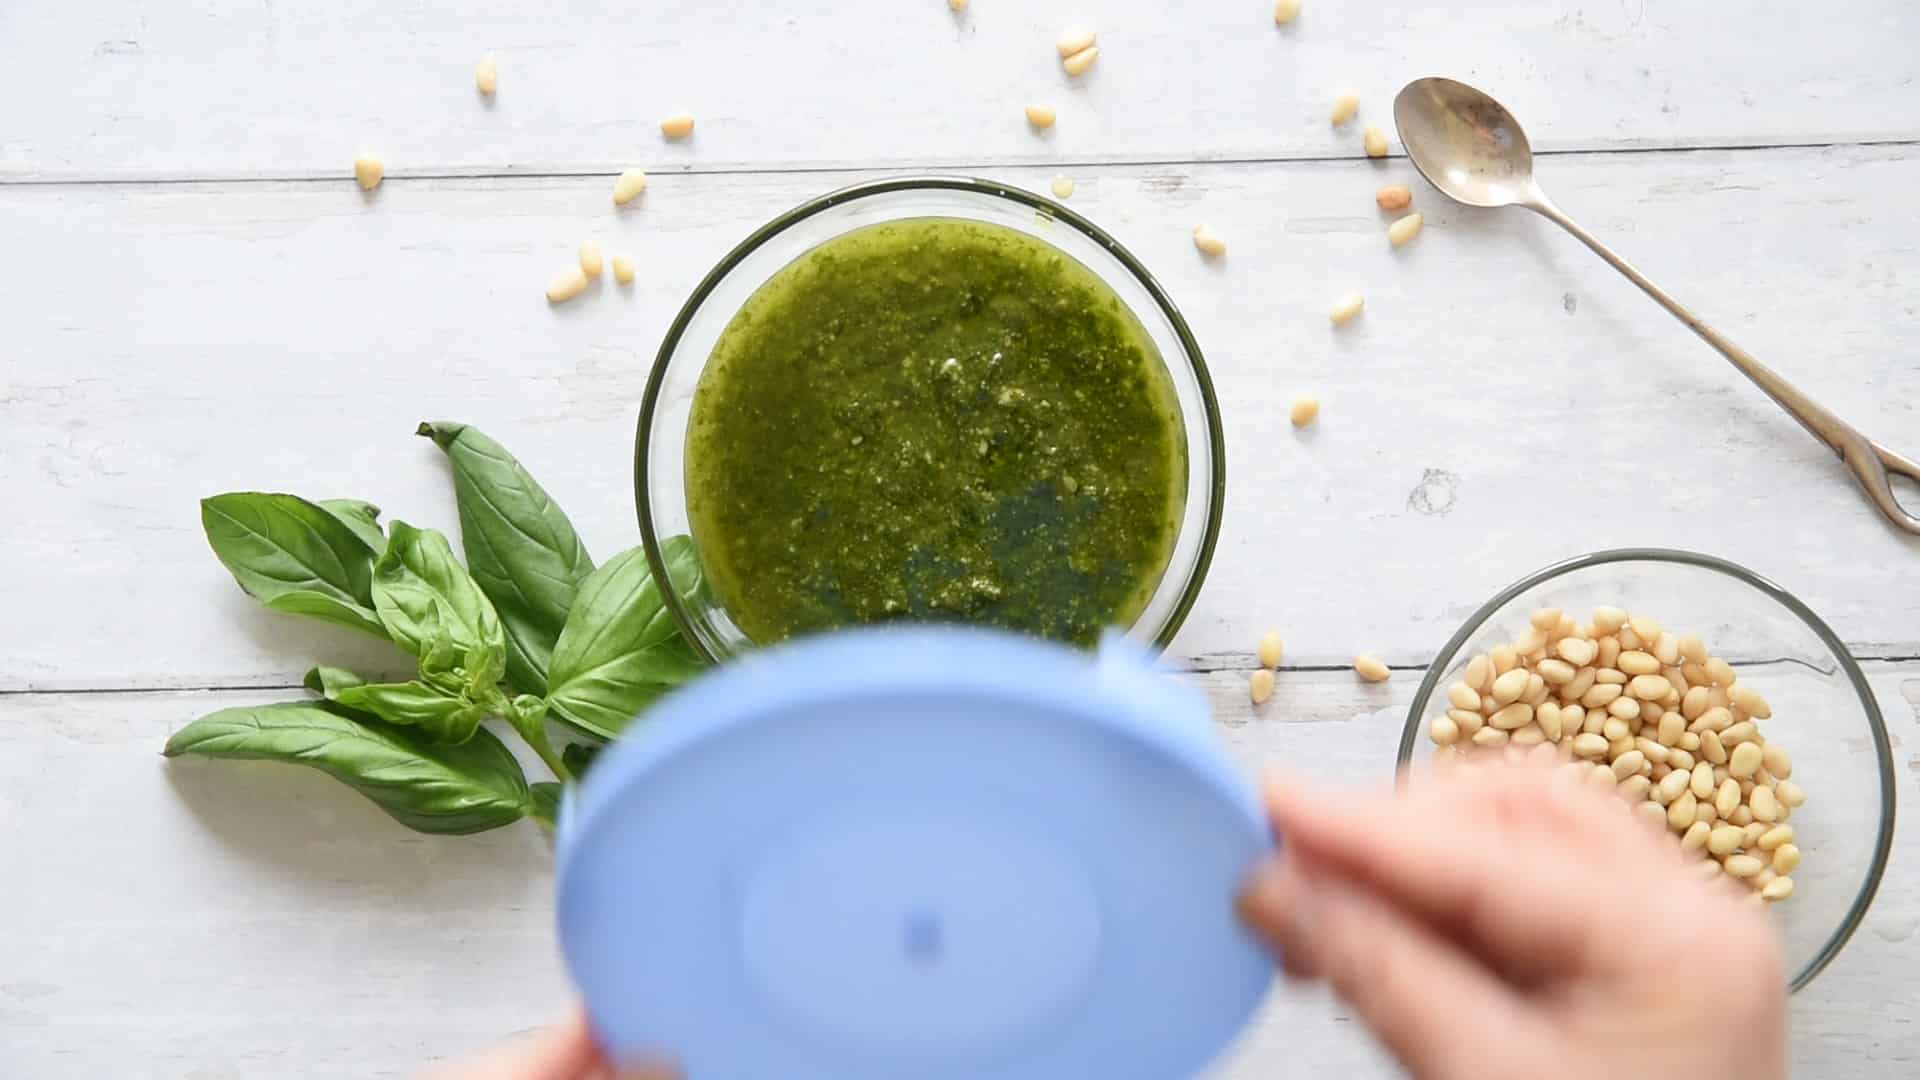 Cover the pesto to store it